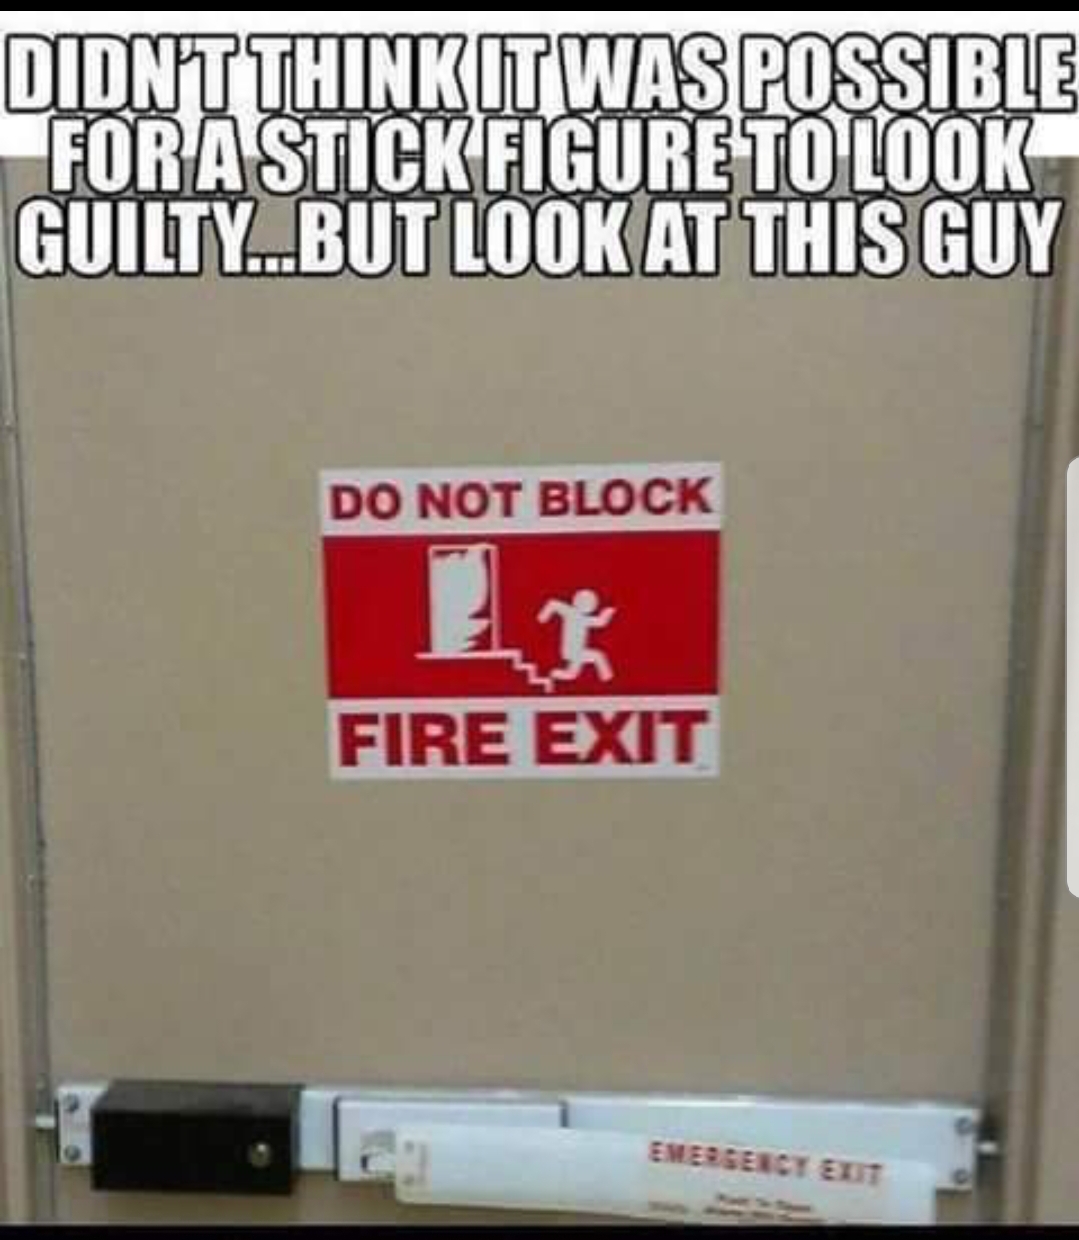 fire exit signs - Didnt Think It Was Possible For A Stick Figure To Look Guilty...But Look At This Guy Do Not Block Fire Exit Emergency Elit